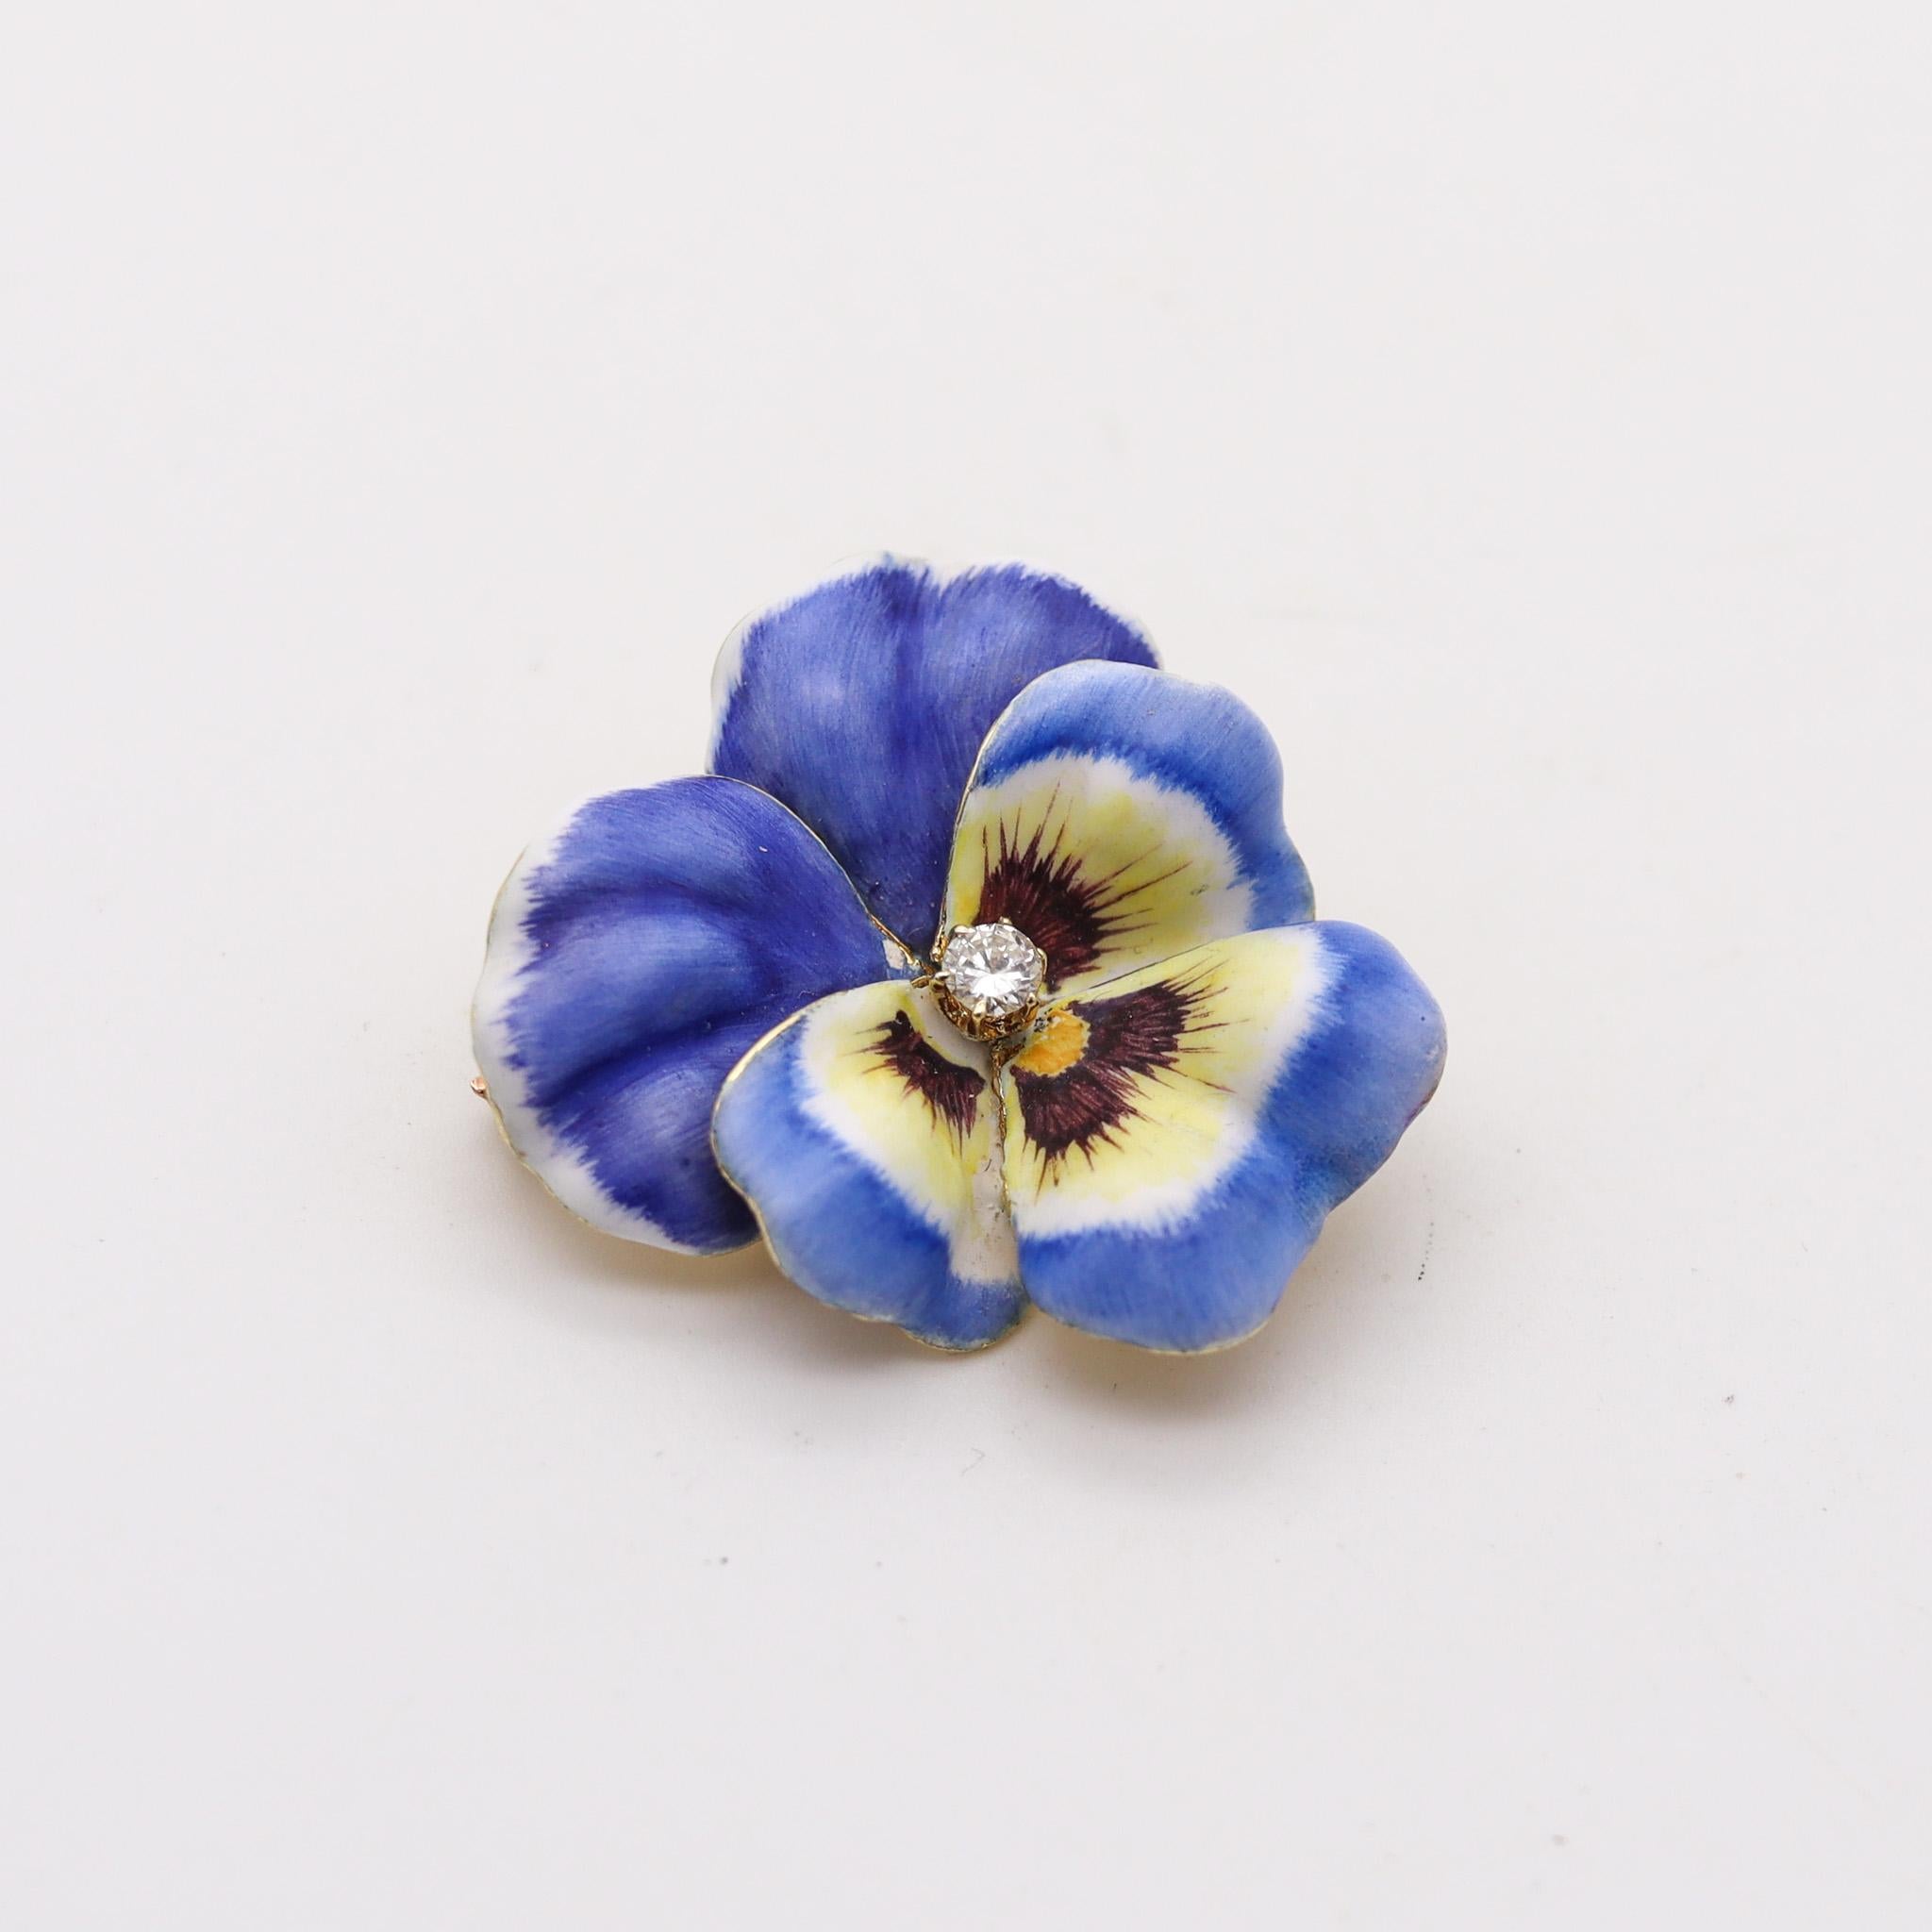 Edwardian enameled Pansy flower brooch.

Beautiful three-dimensional five-petals pansy flower, created in New Jersey North America during the Edwardian and the Art Nouveau periods, between the 1900-1910. This brooch has been carefully crafted in